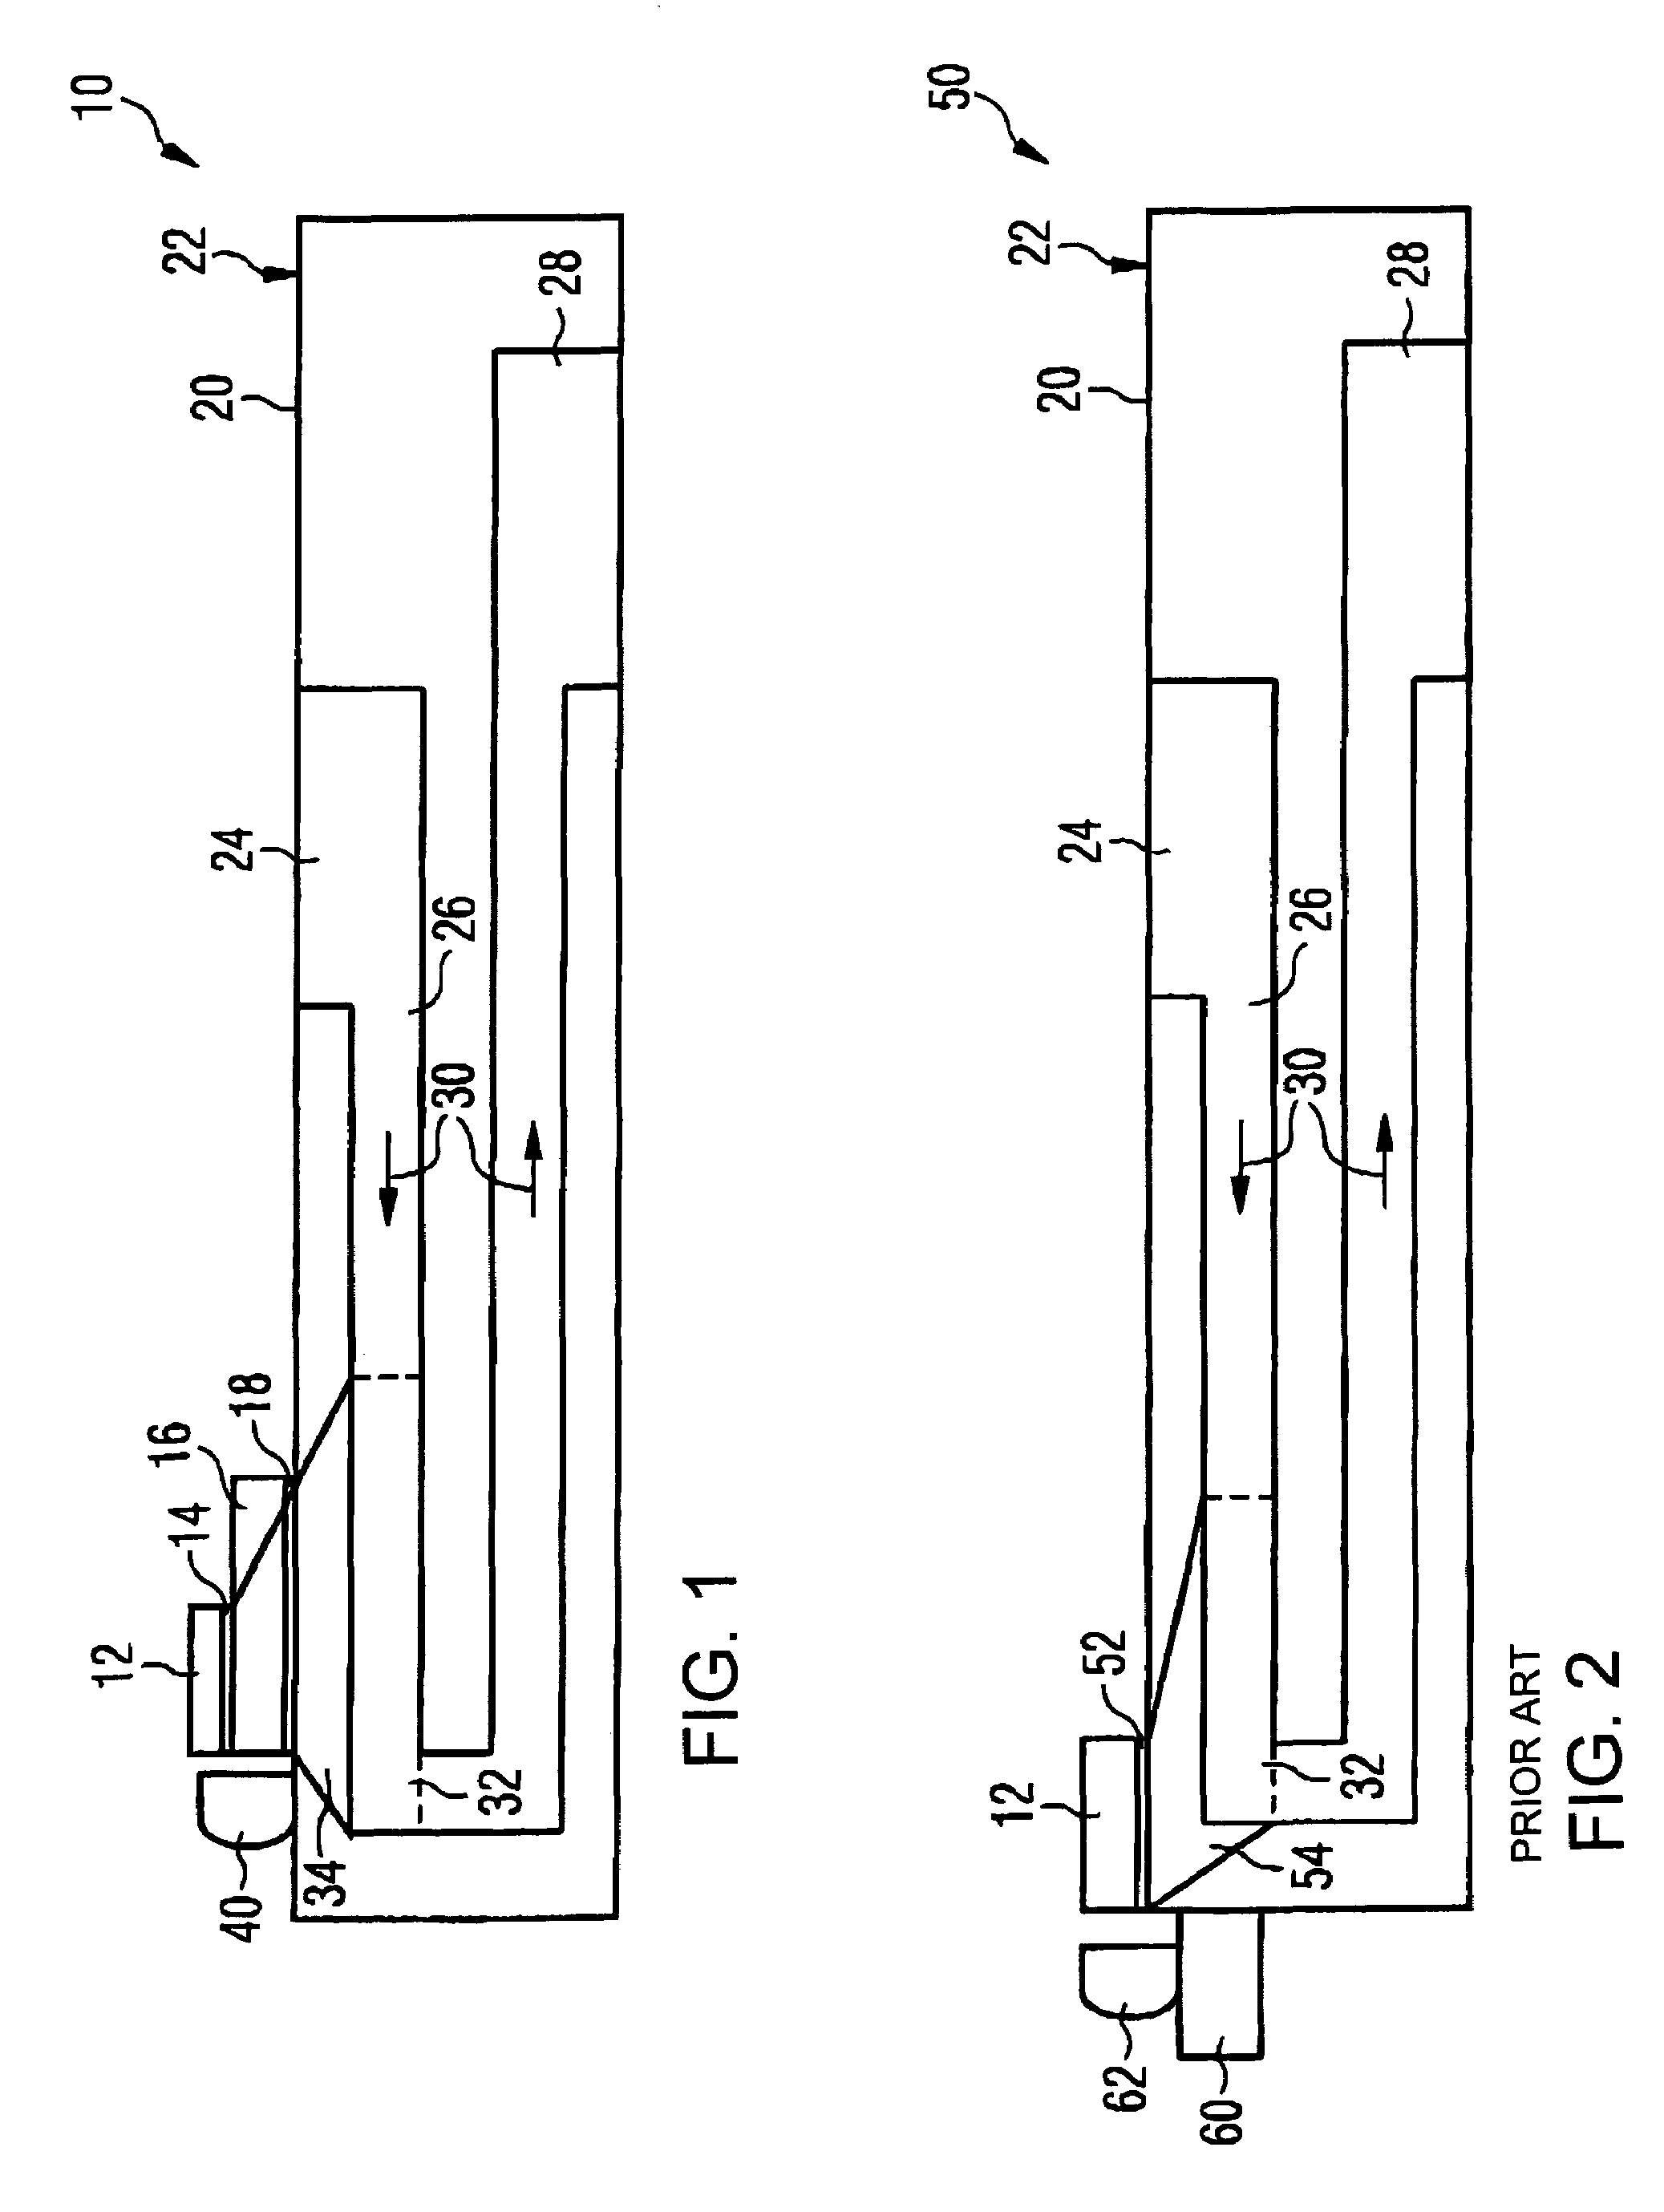 Semiconductor device with a cooling element